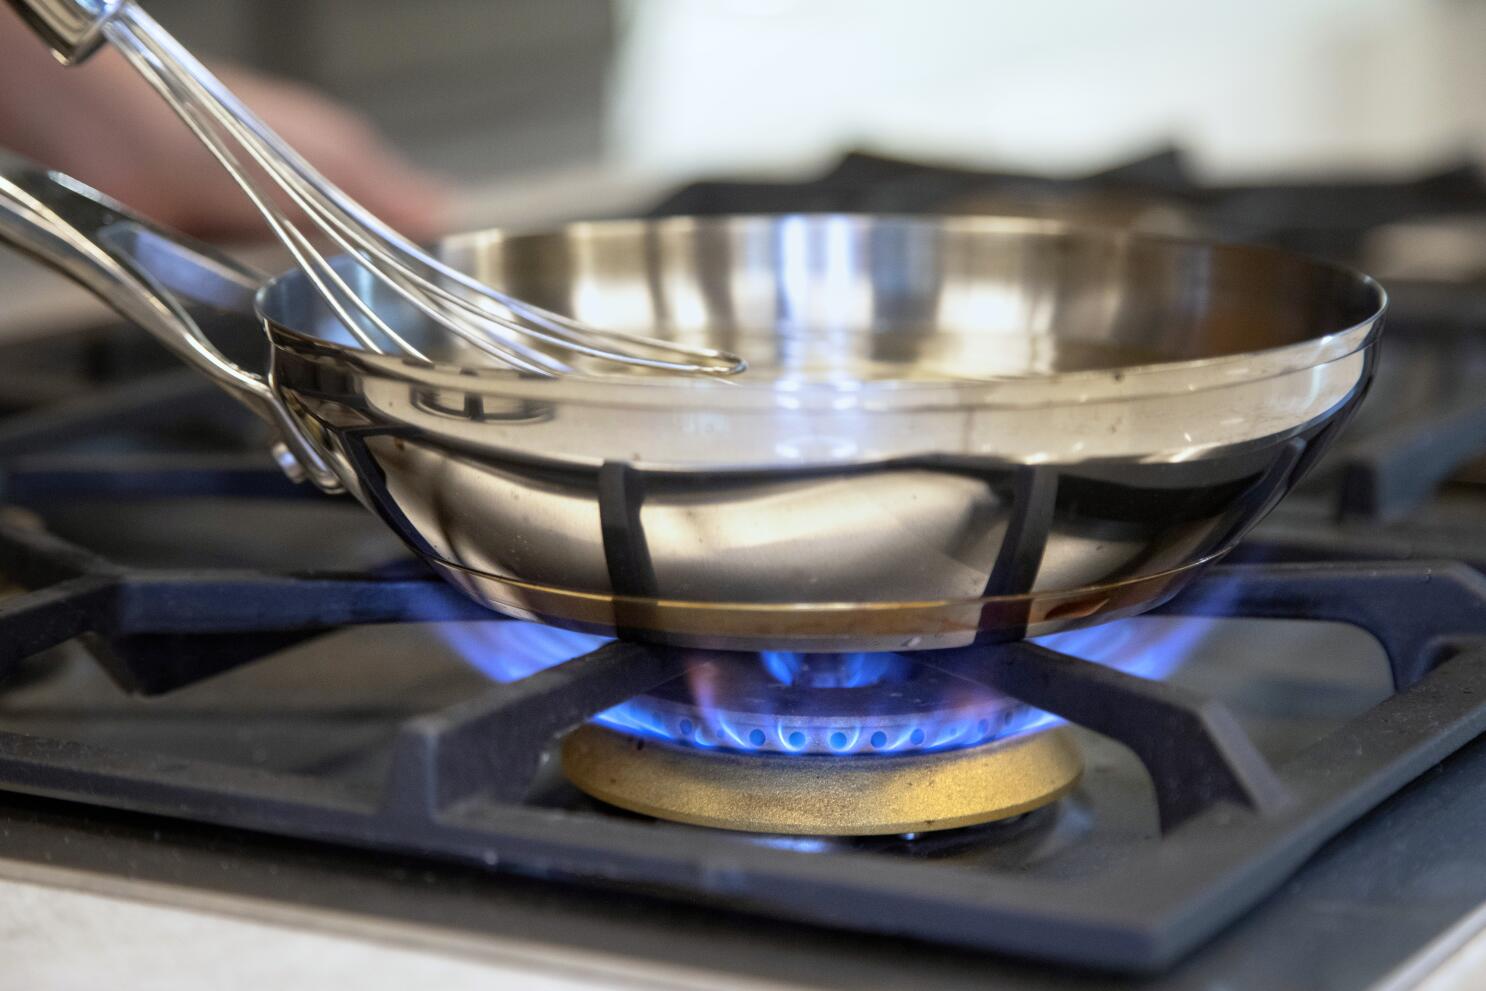 Will your gas range make you sick? Here's what the science says